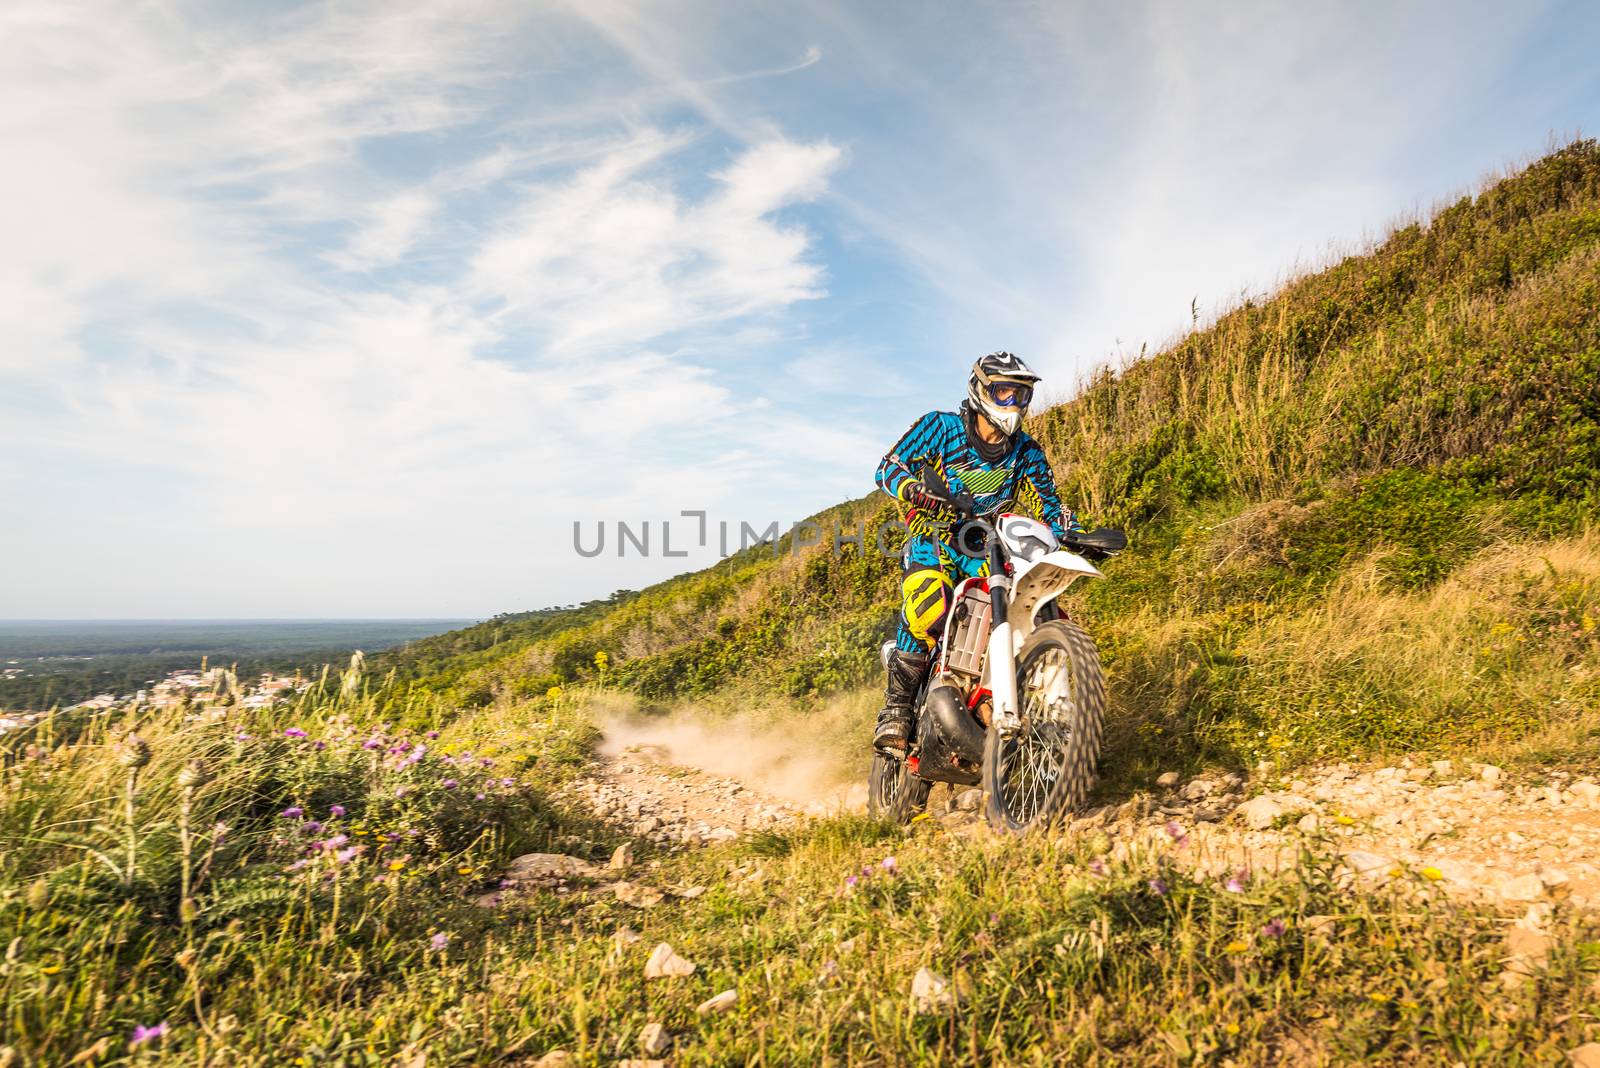 Enduro rider climbing a steep slope against a sunset sky.